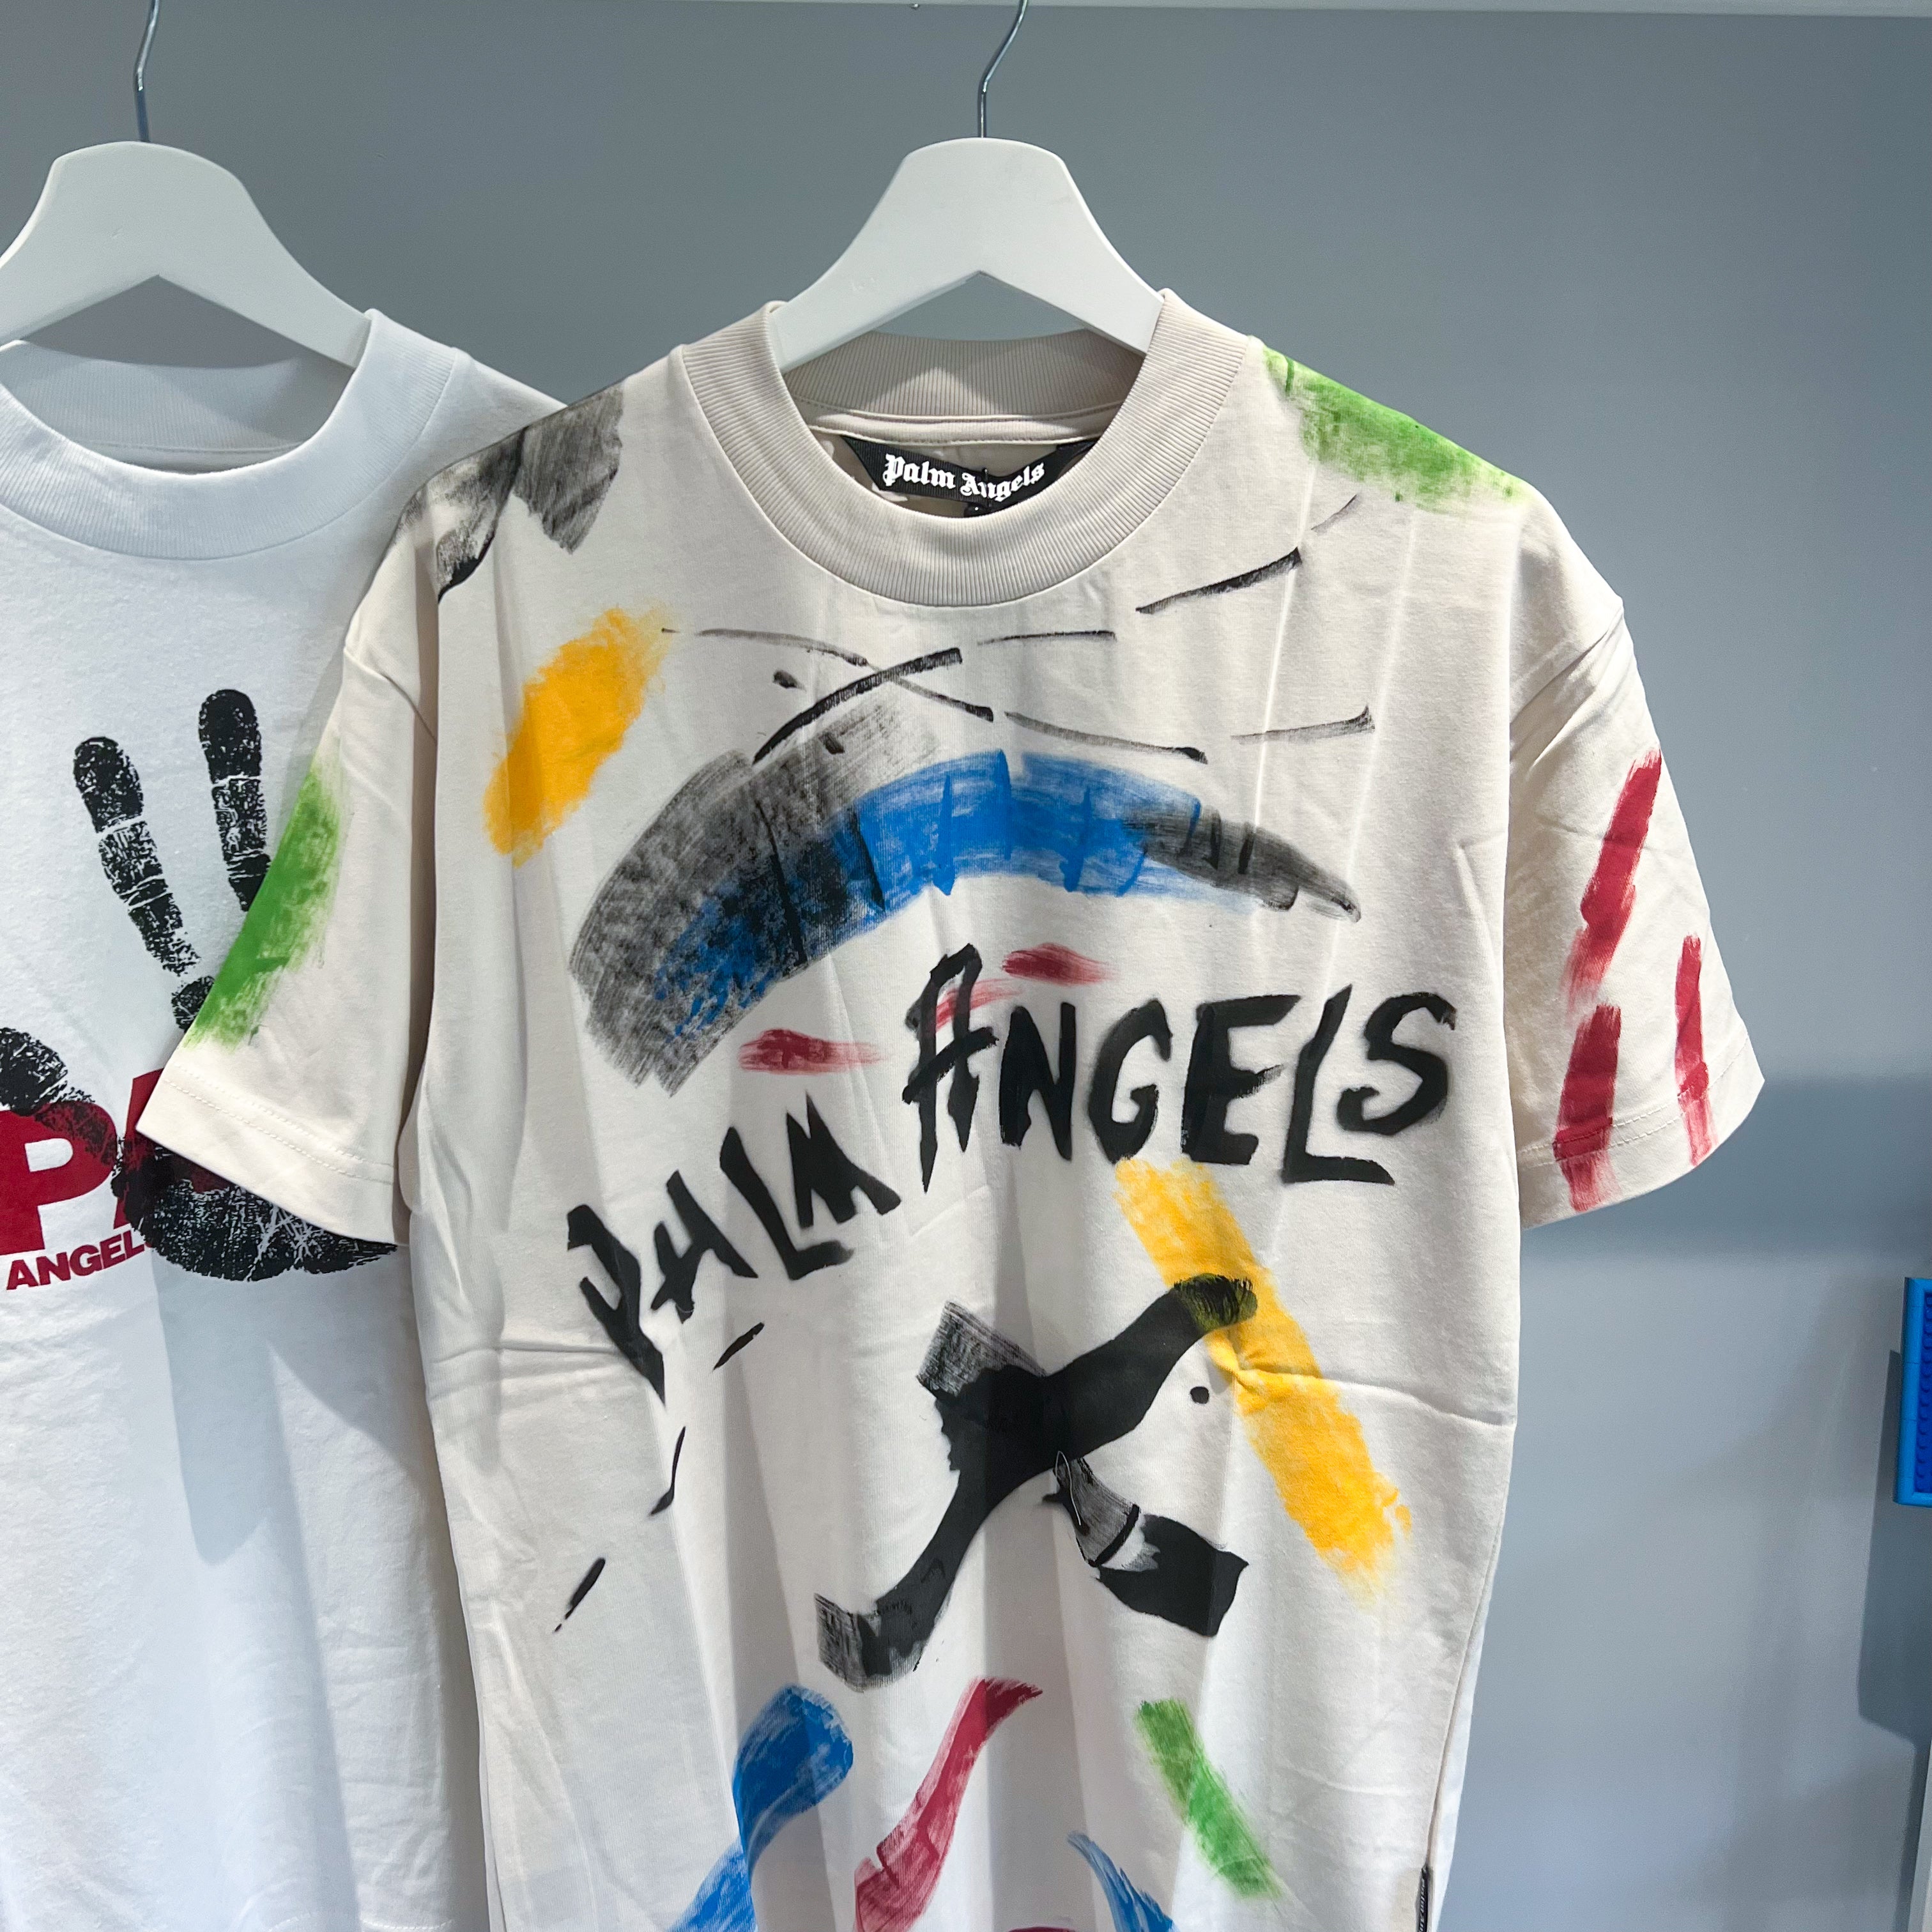 Palm Angels Paint Stroke Tee